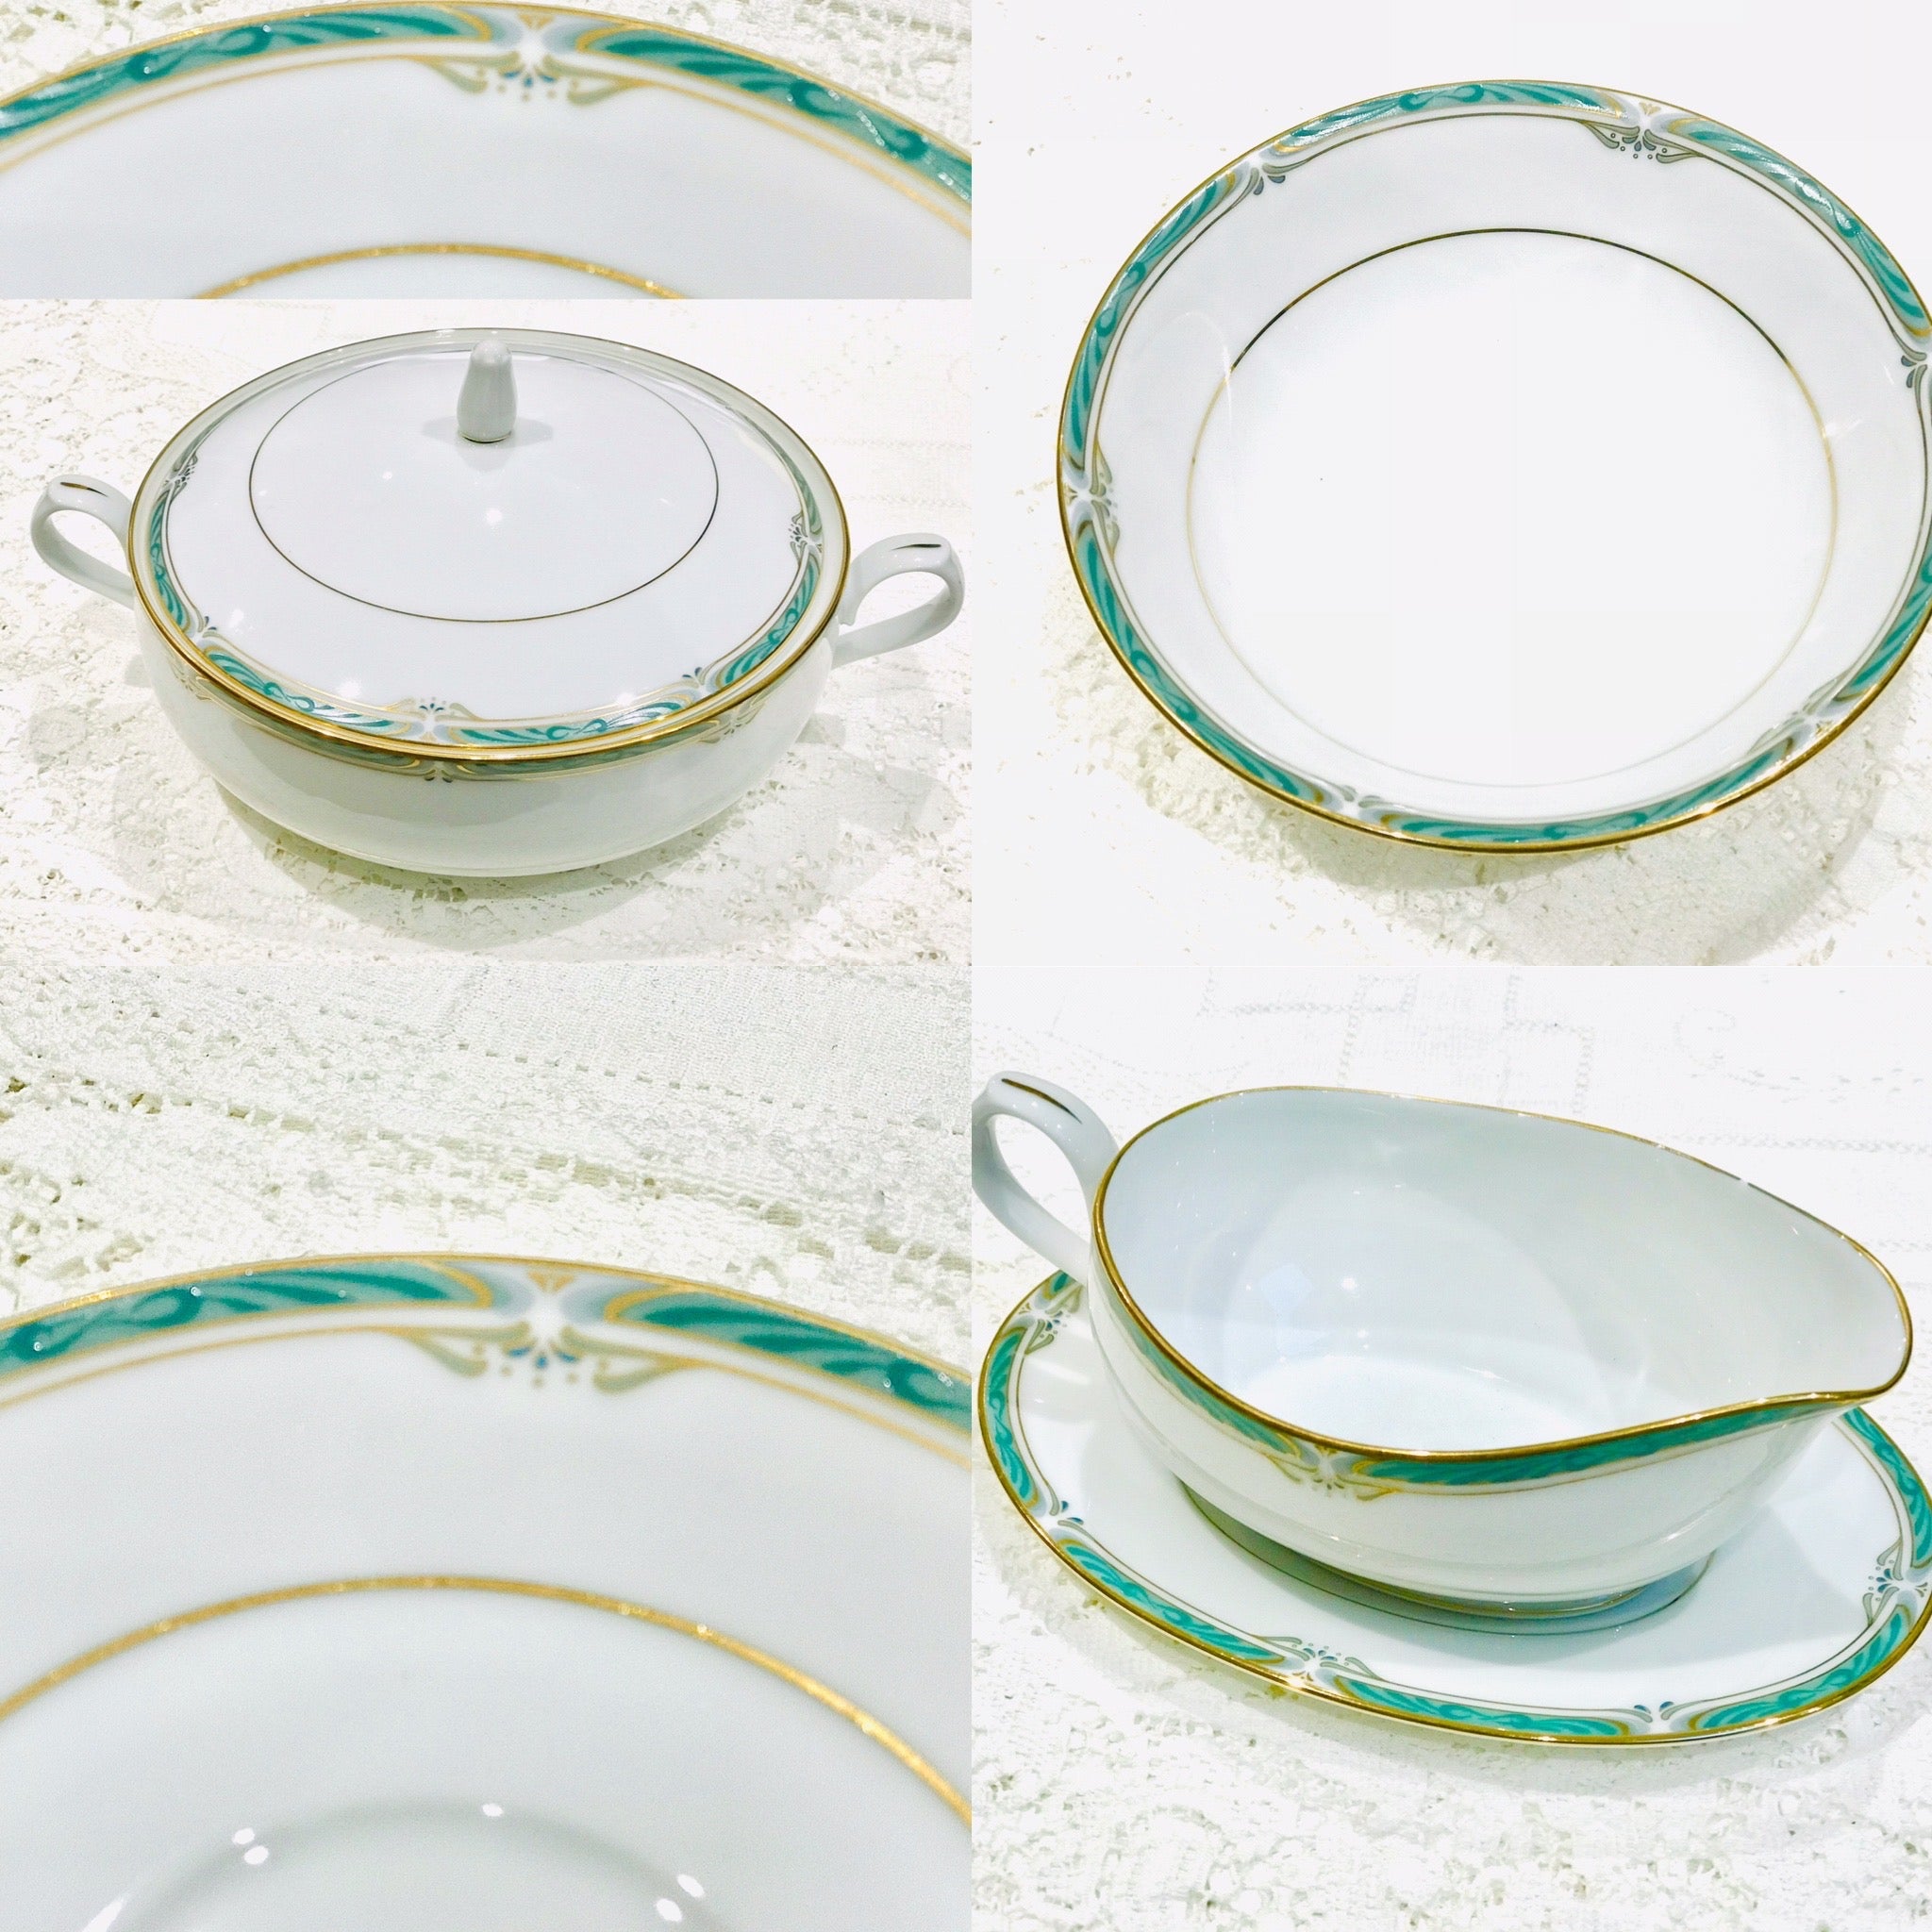 Noritake Porcelain Dinner Set for 4 includes dinner plates and bowls, the  pattern is called Glenabbey, Replacements, colour green and white, 